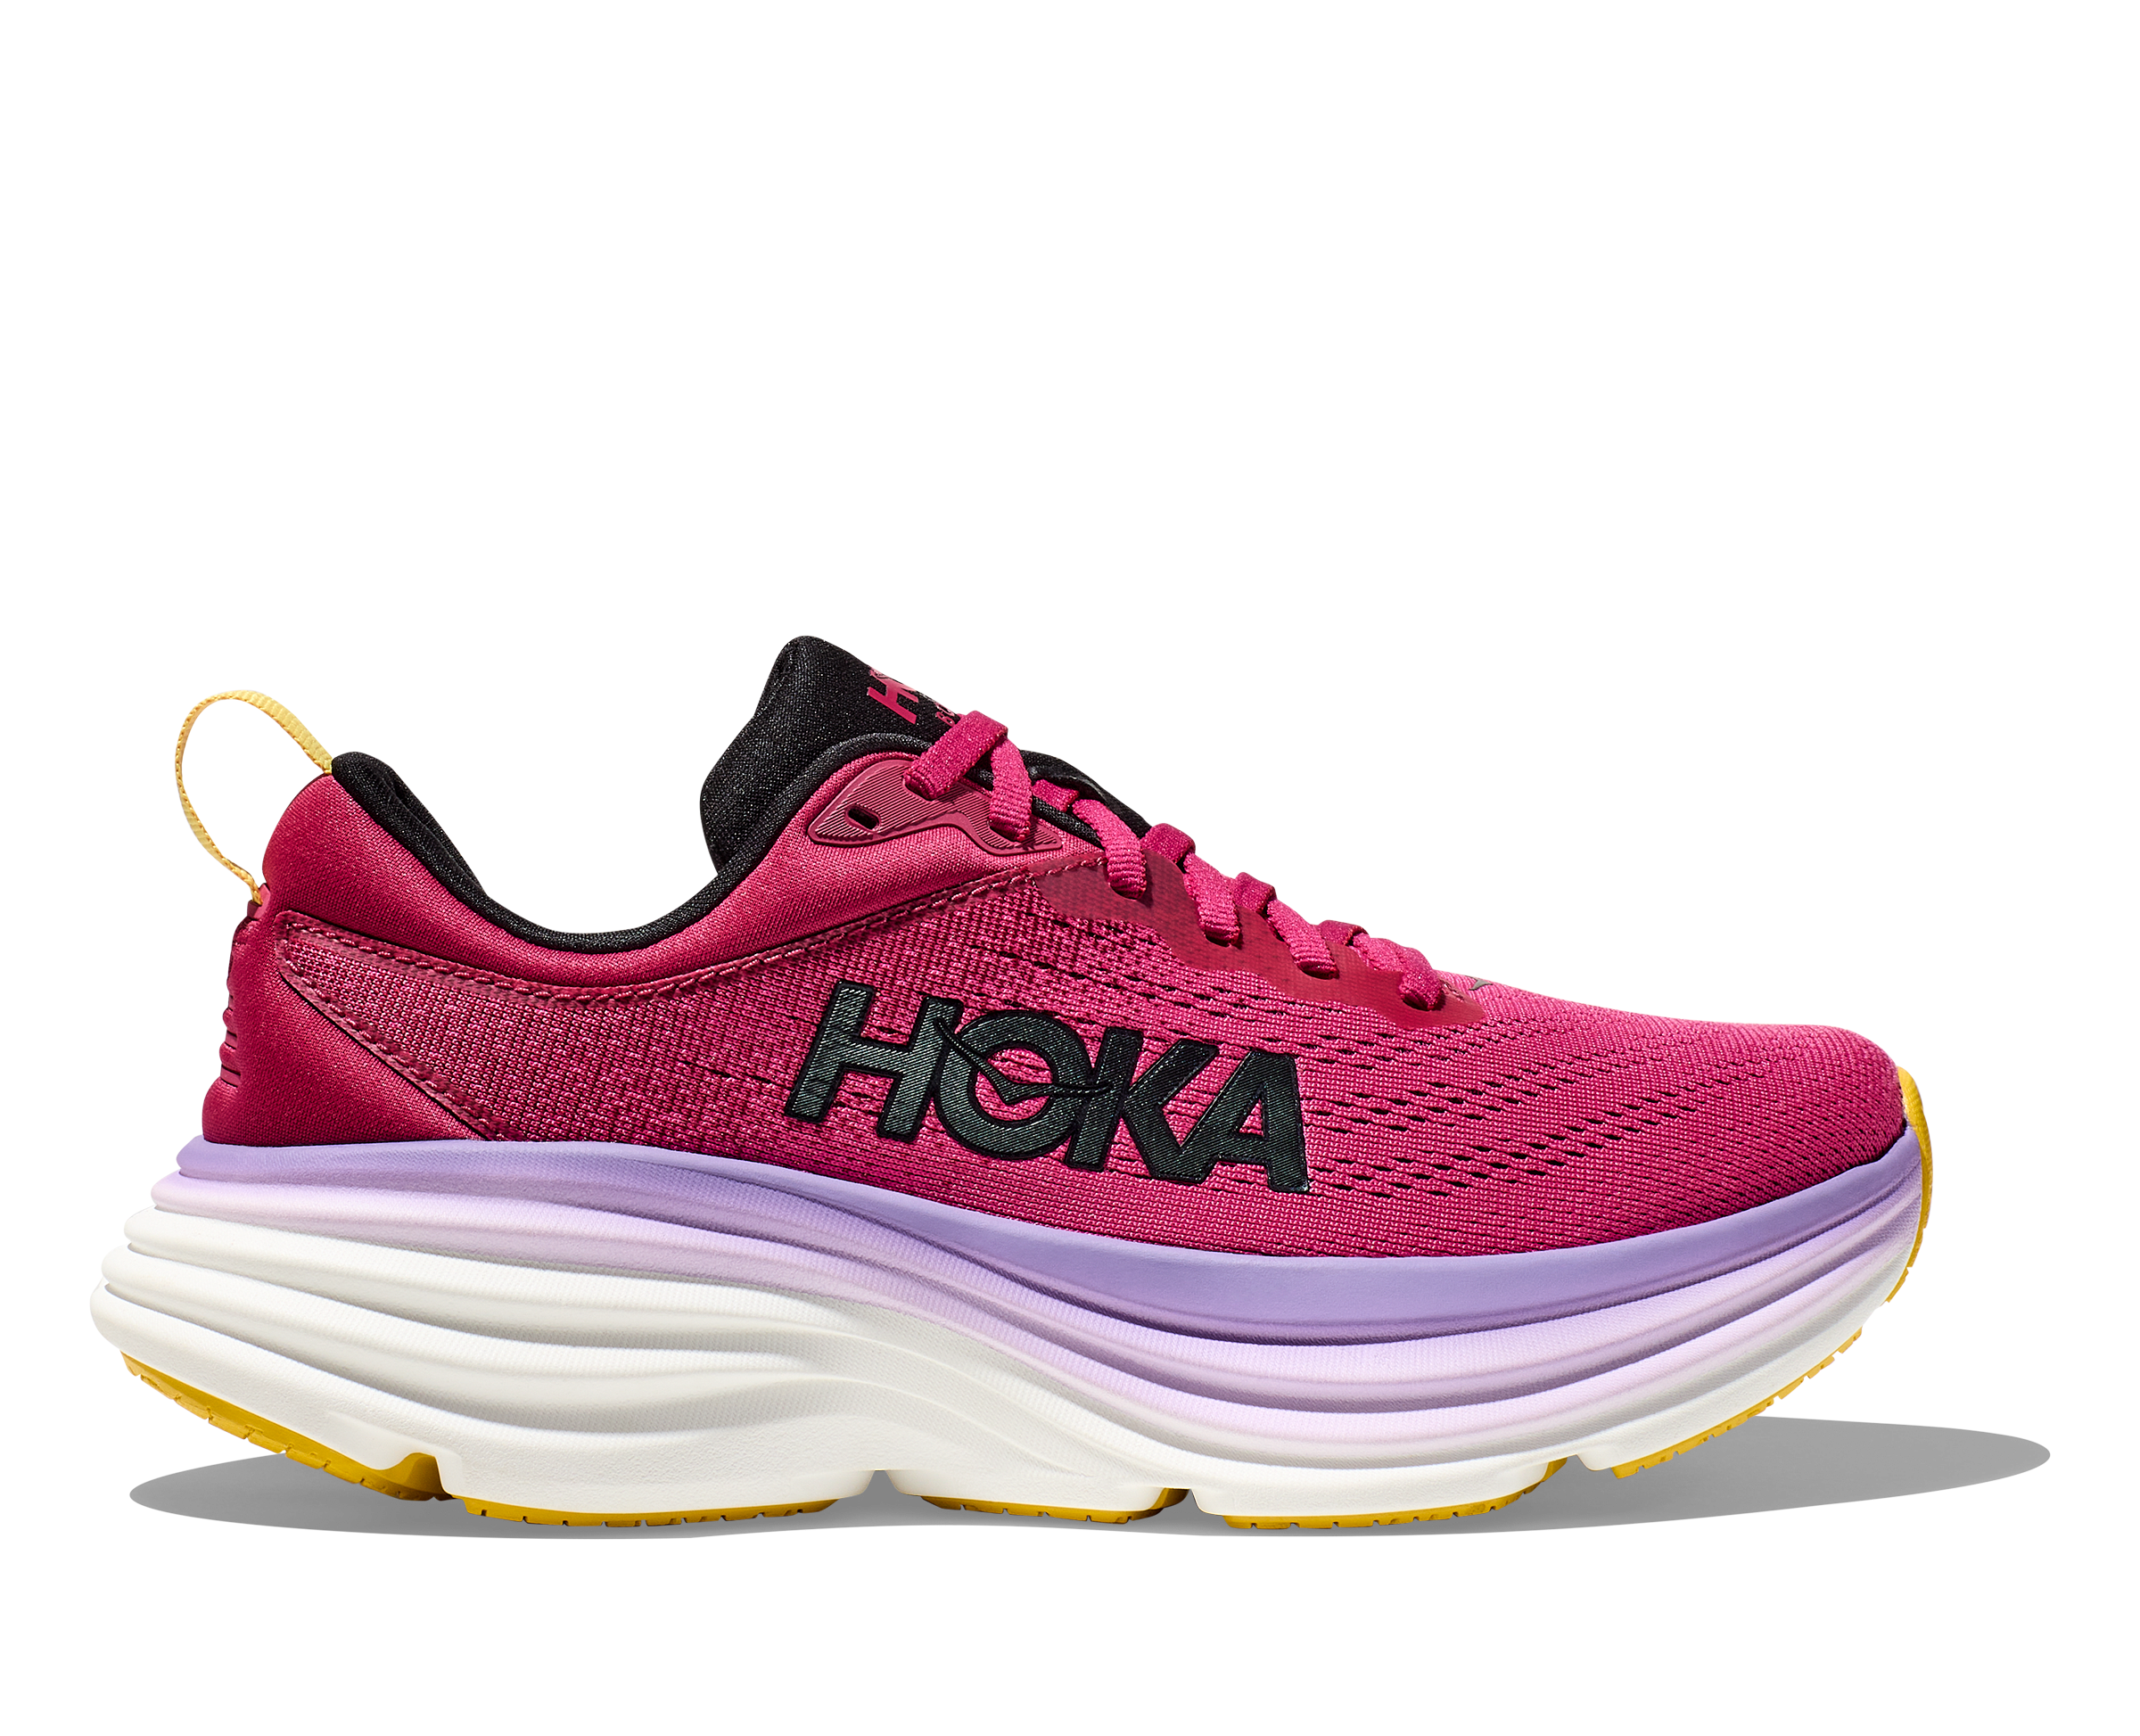 Lateral view of the Women's Bondi 8 by HOKA in the color Cherries Jubilee/Pink Yarrow